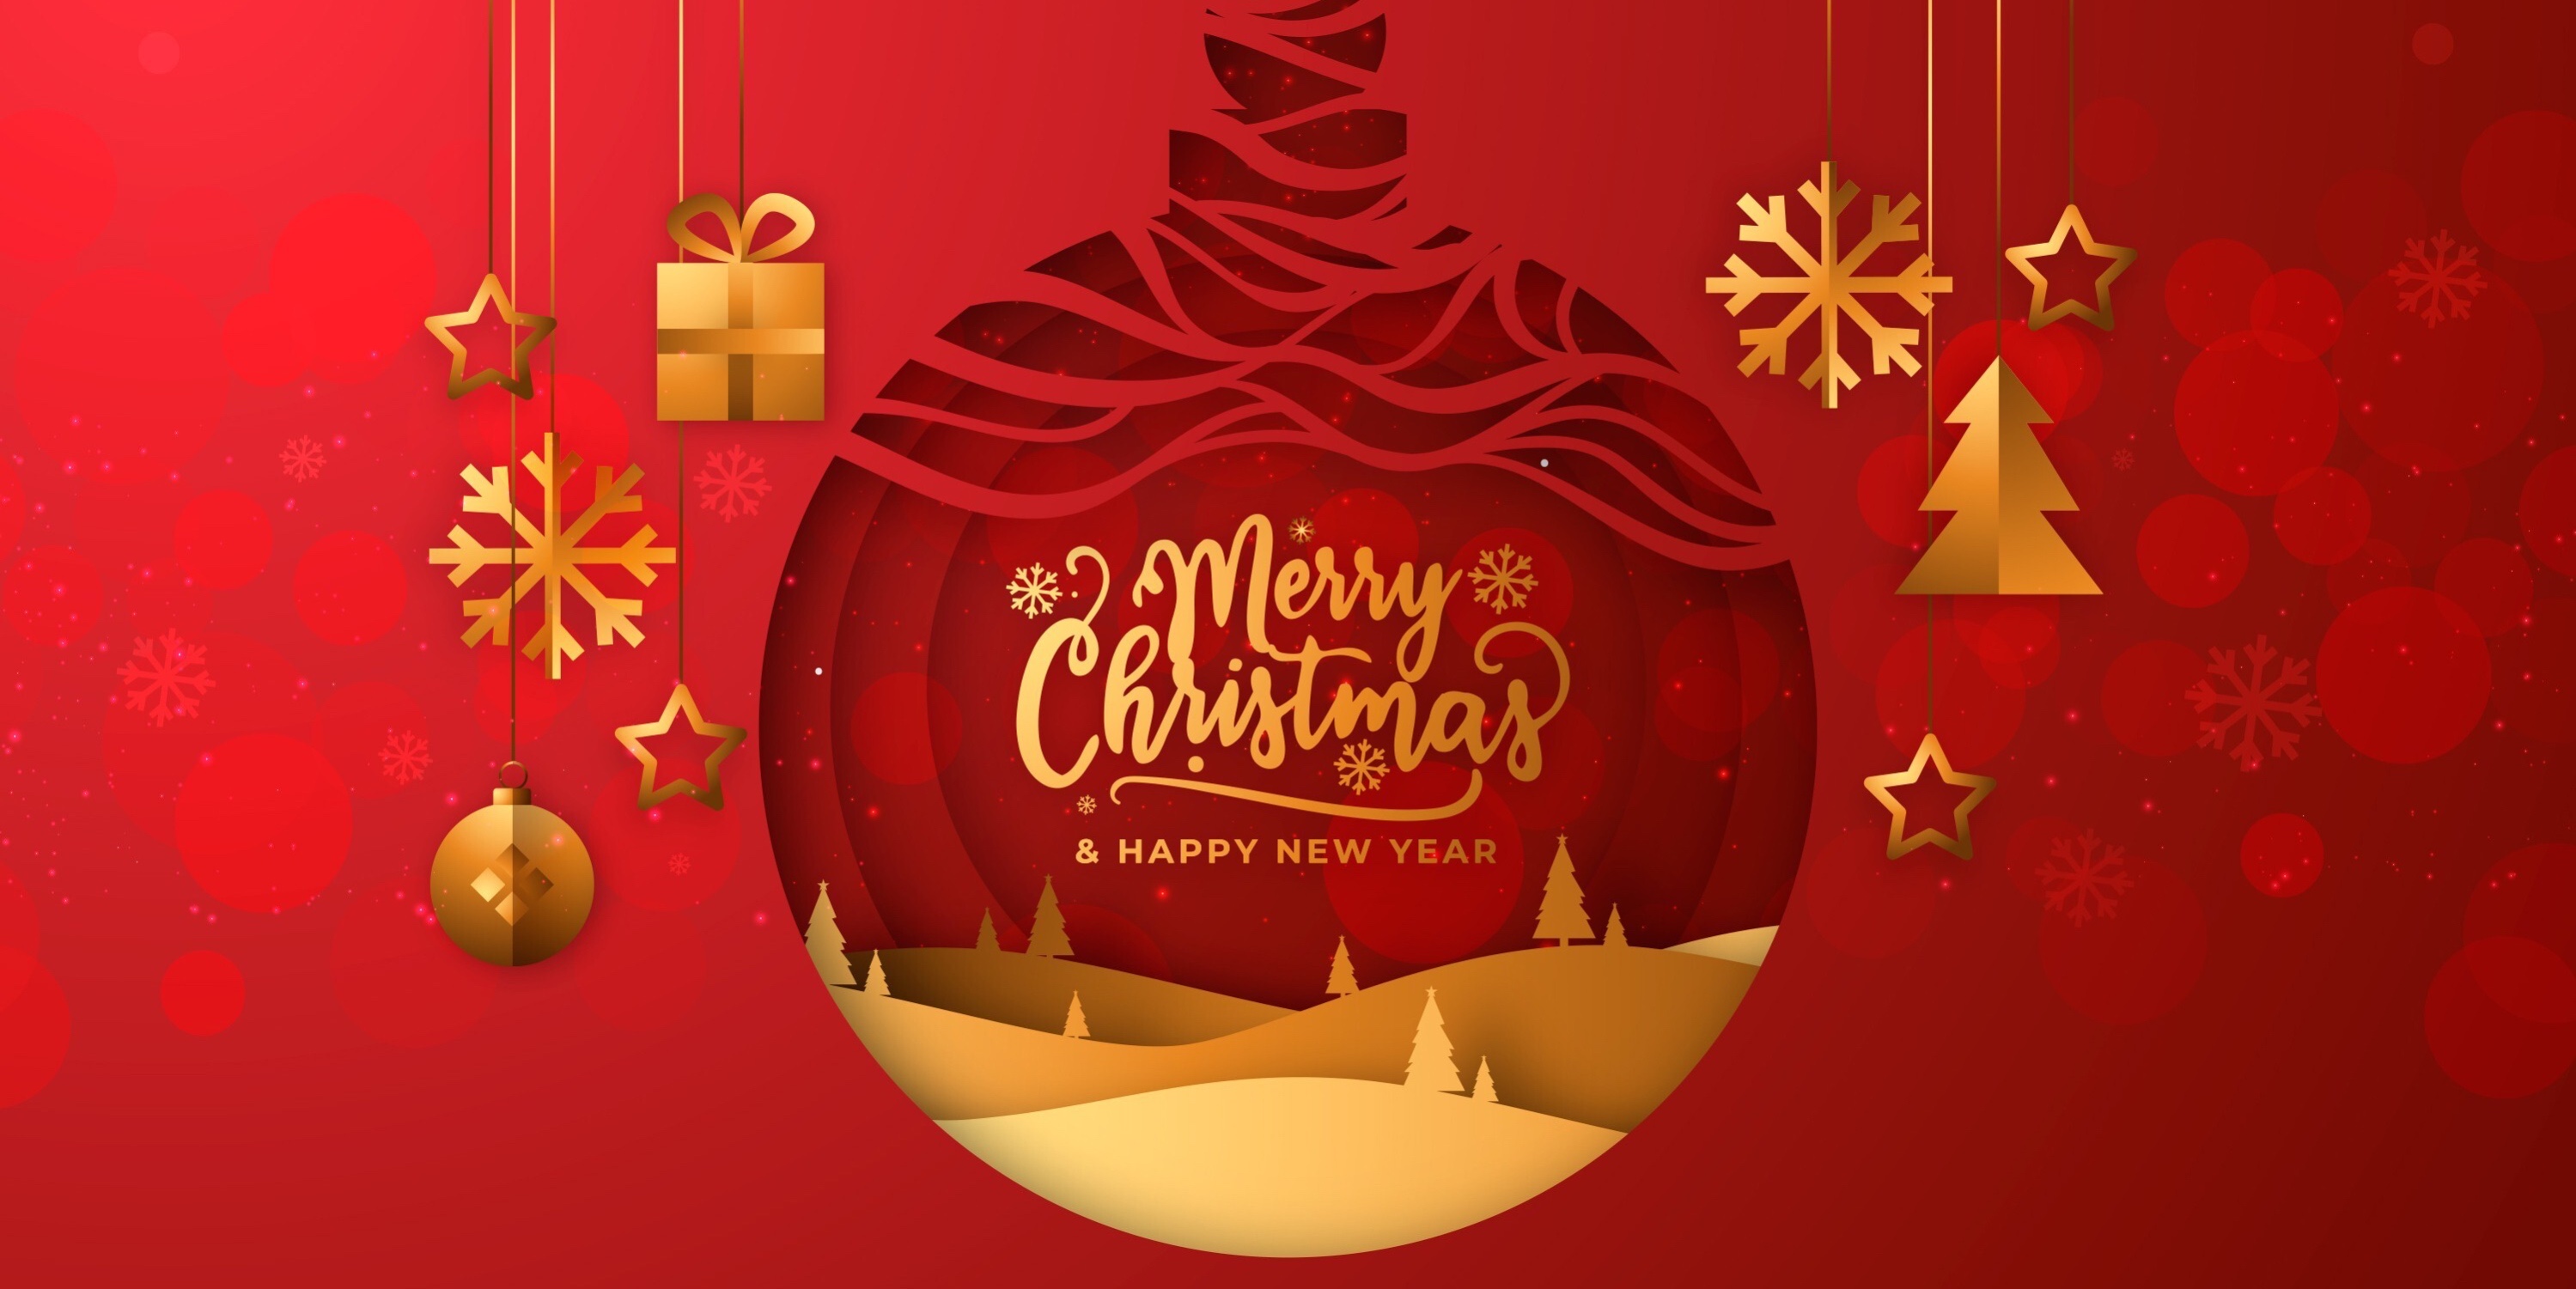 Merry Christmas from Reliance!